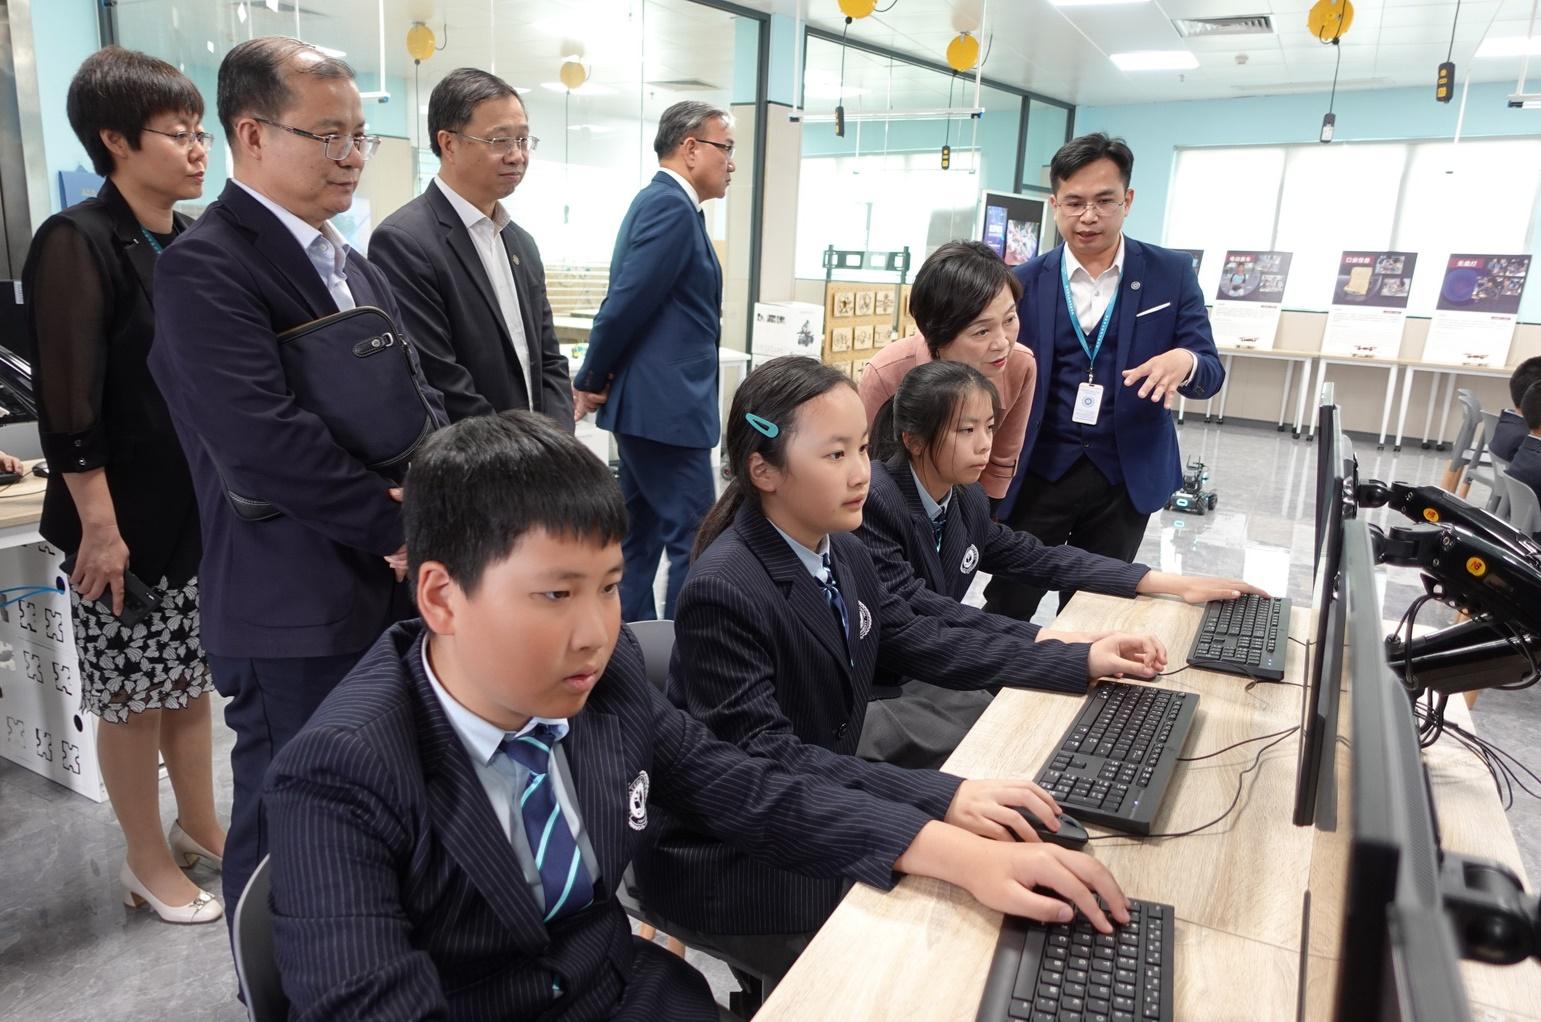 The Secretary for Education, Dr Choi Yuk-lin, today (March 8) visited the Affiliated School of JNU for Hong Kong and Macao Students in Guangzhou to understand more about the study situation of children of Hong Kong people on the Mainland. Photo shows Dr Choi (front row, second right) observing students learning robotics technologies.